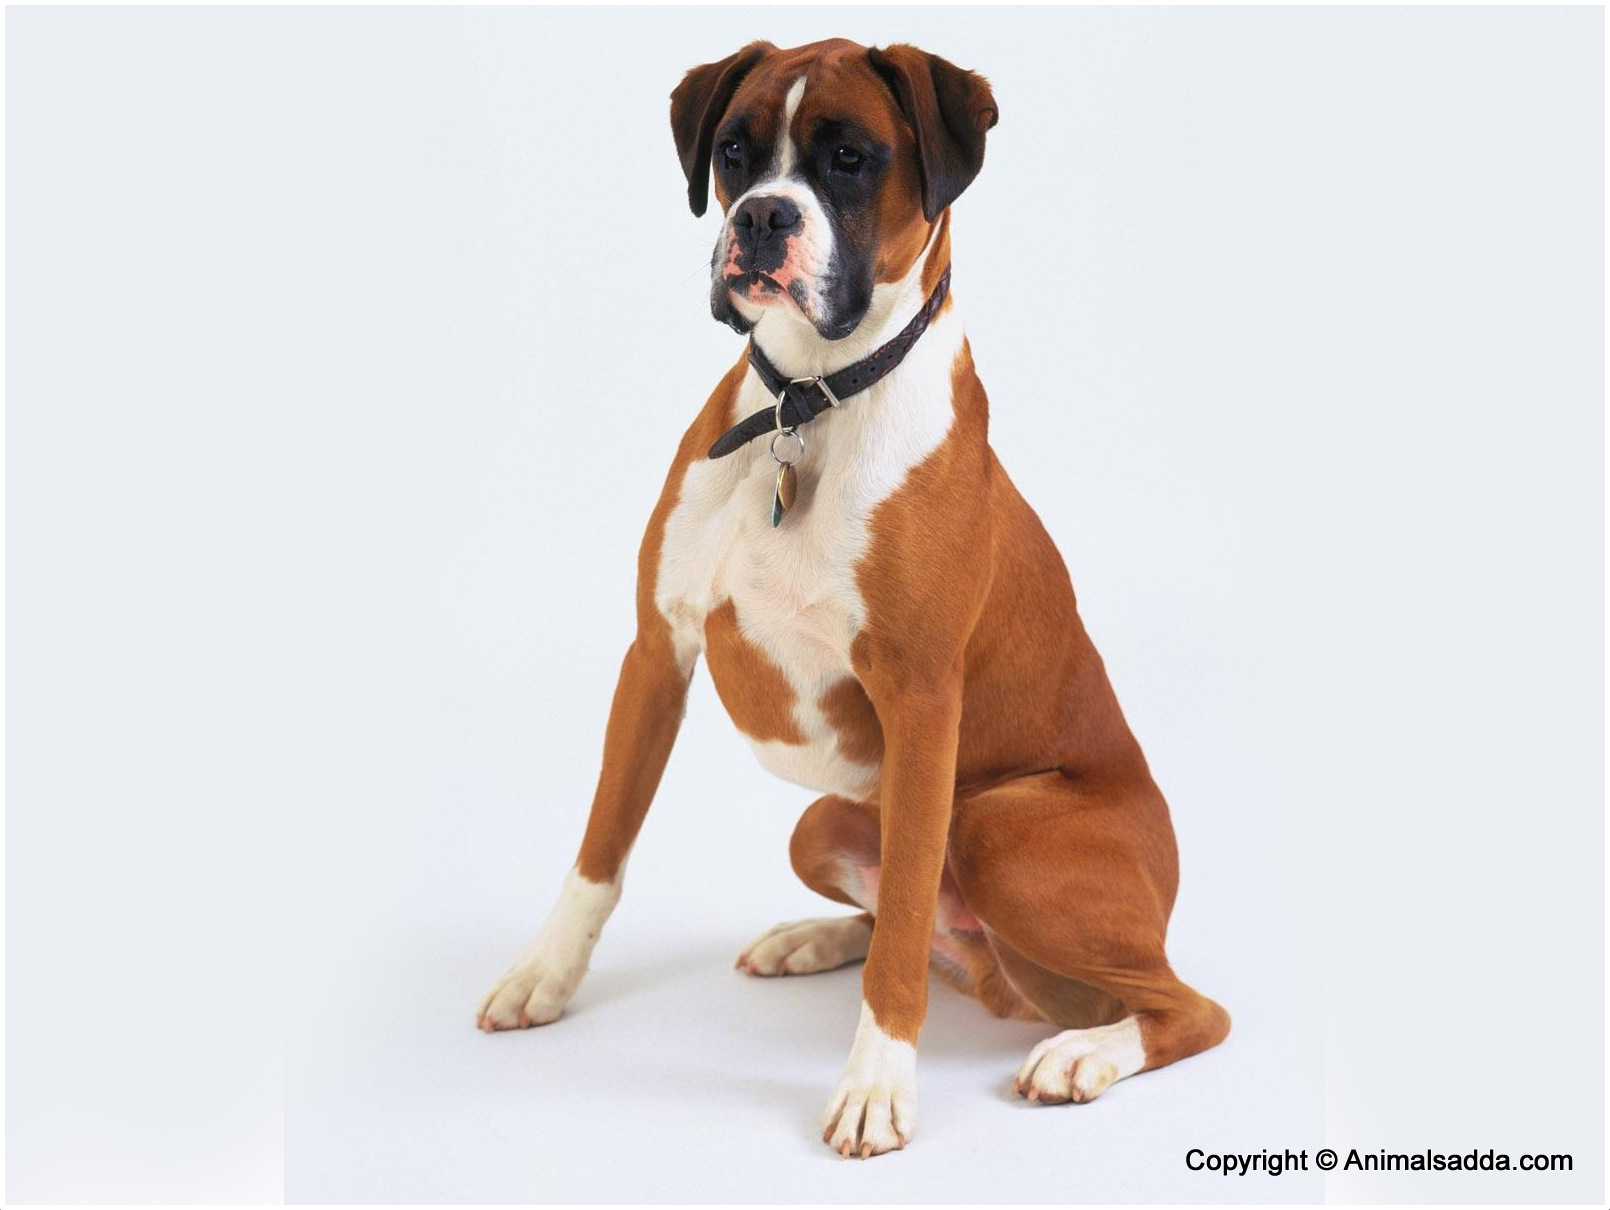 Boxer (Dog) - Facts, Pictures, Puppies, Price, Breeds ...